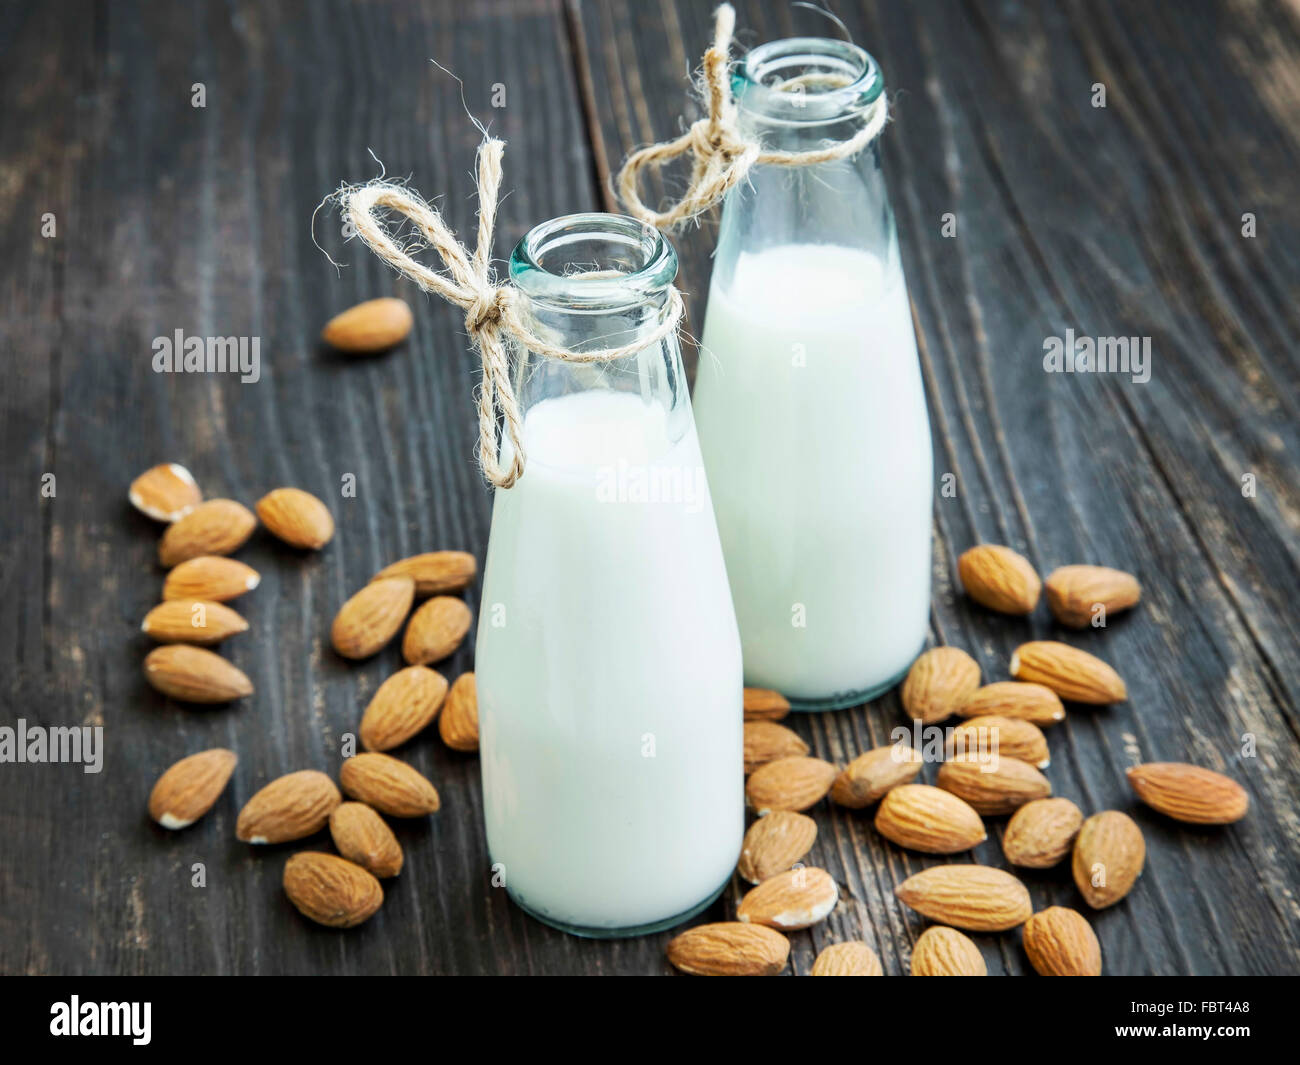 Almond milk in bottles with almond nuts on wooden background Stock Photo